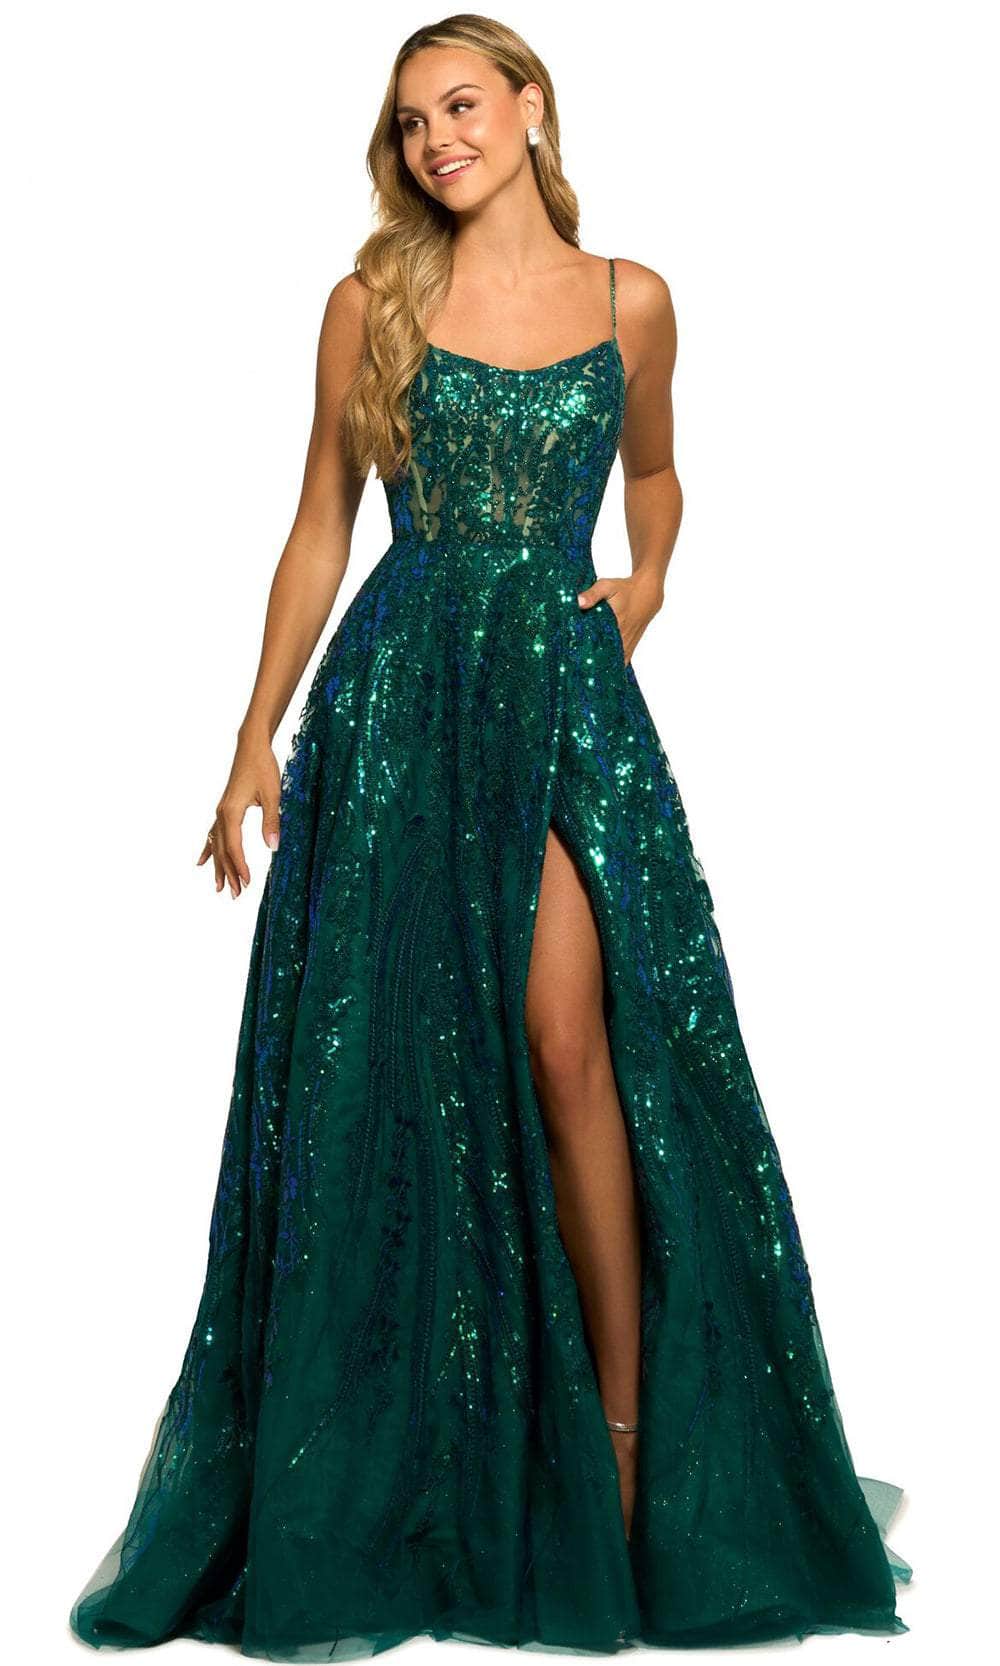 Sherri Hill 55521 - Sequined A-Line Prom Dress Special Occasion Dress